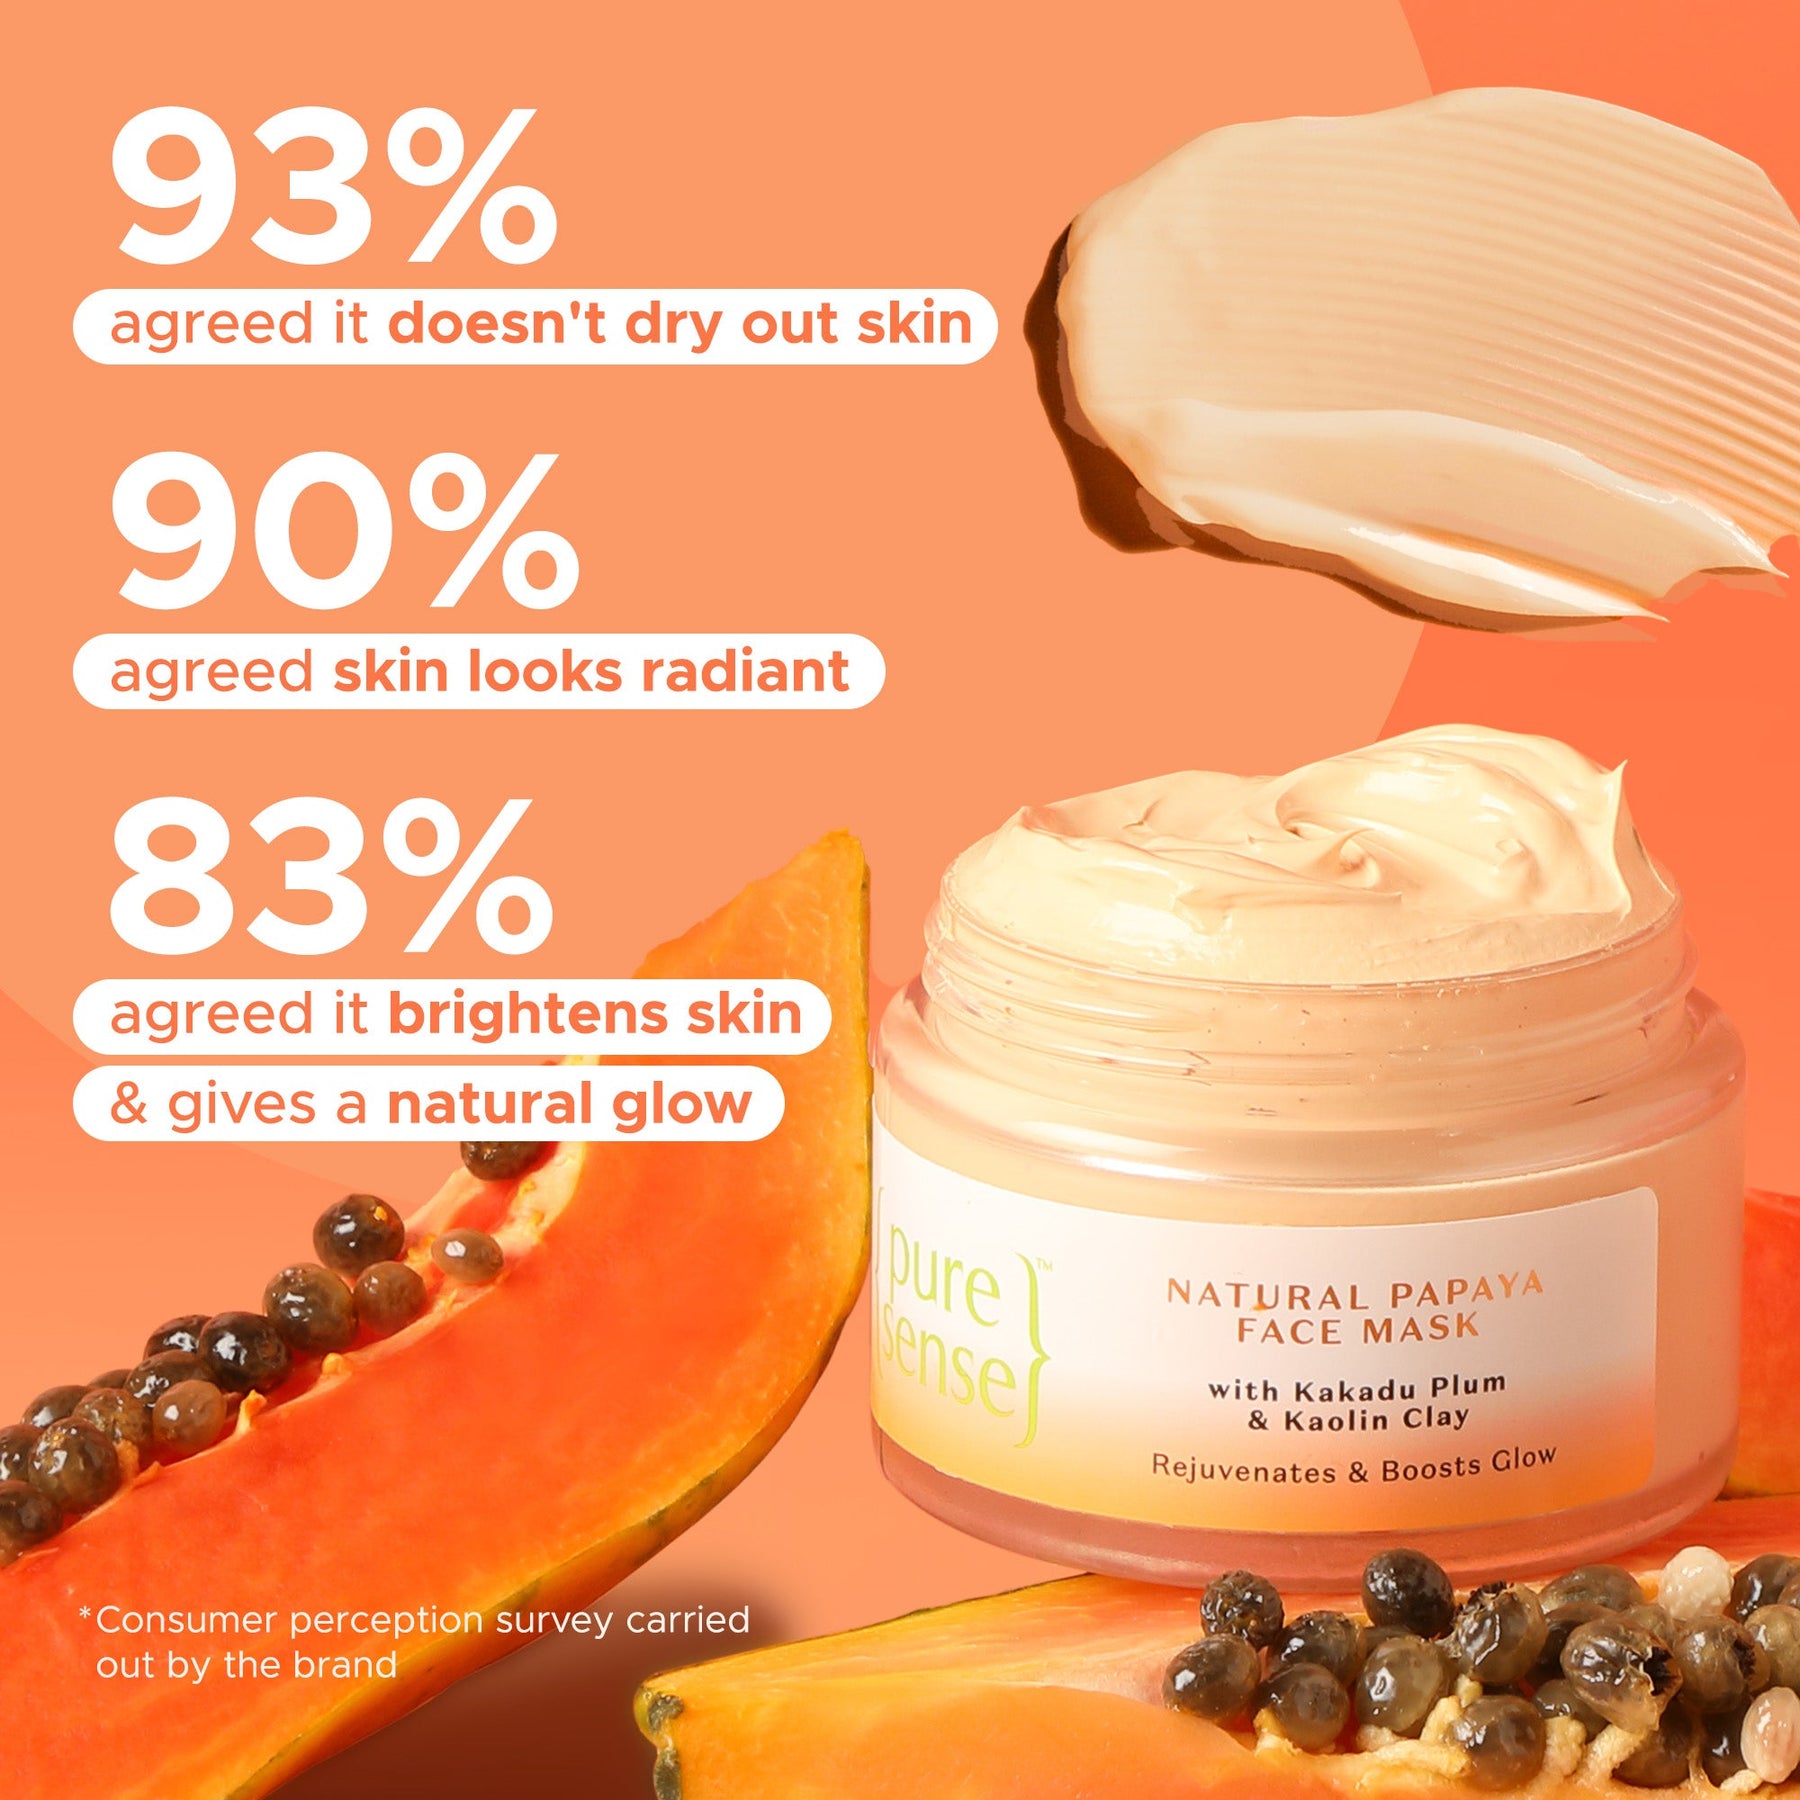 [CRED] Natural Papaya Face Mask | From the makers of Parachute Advansed | 65g